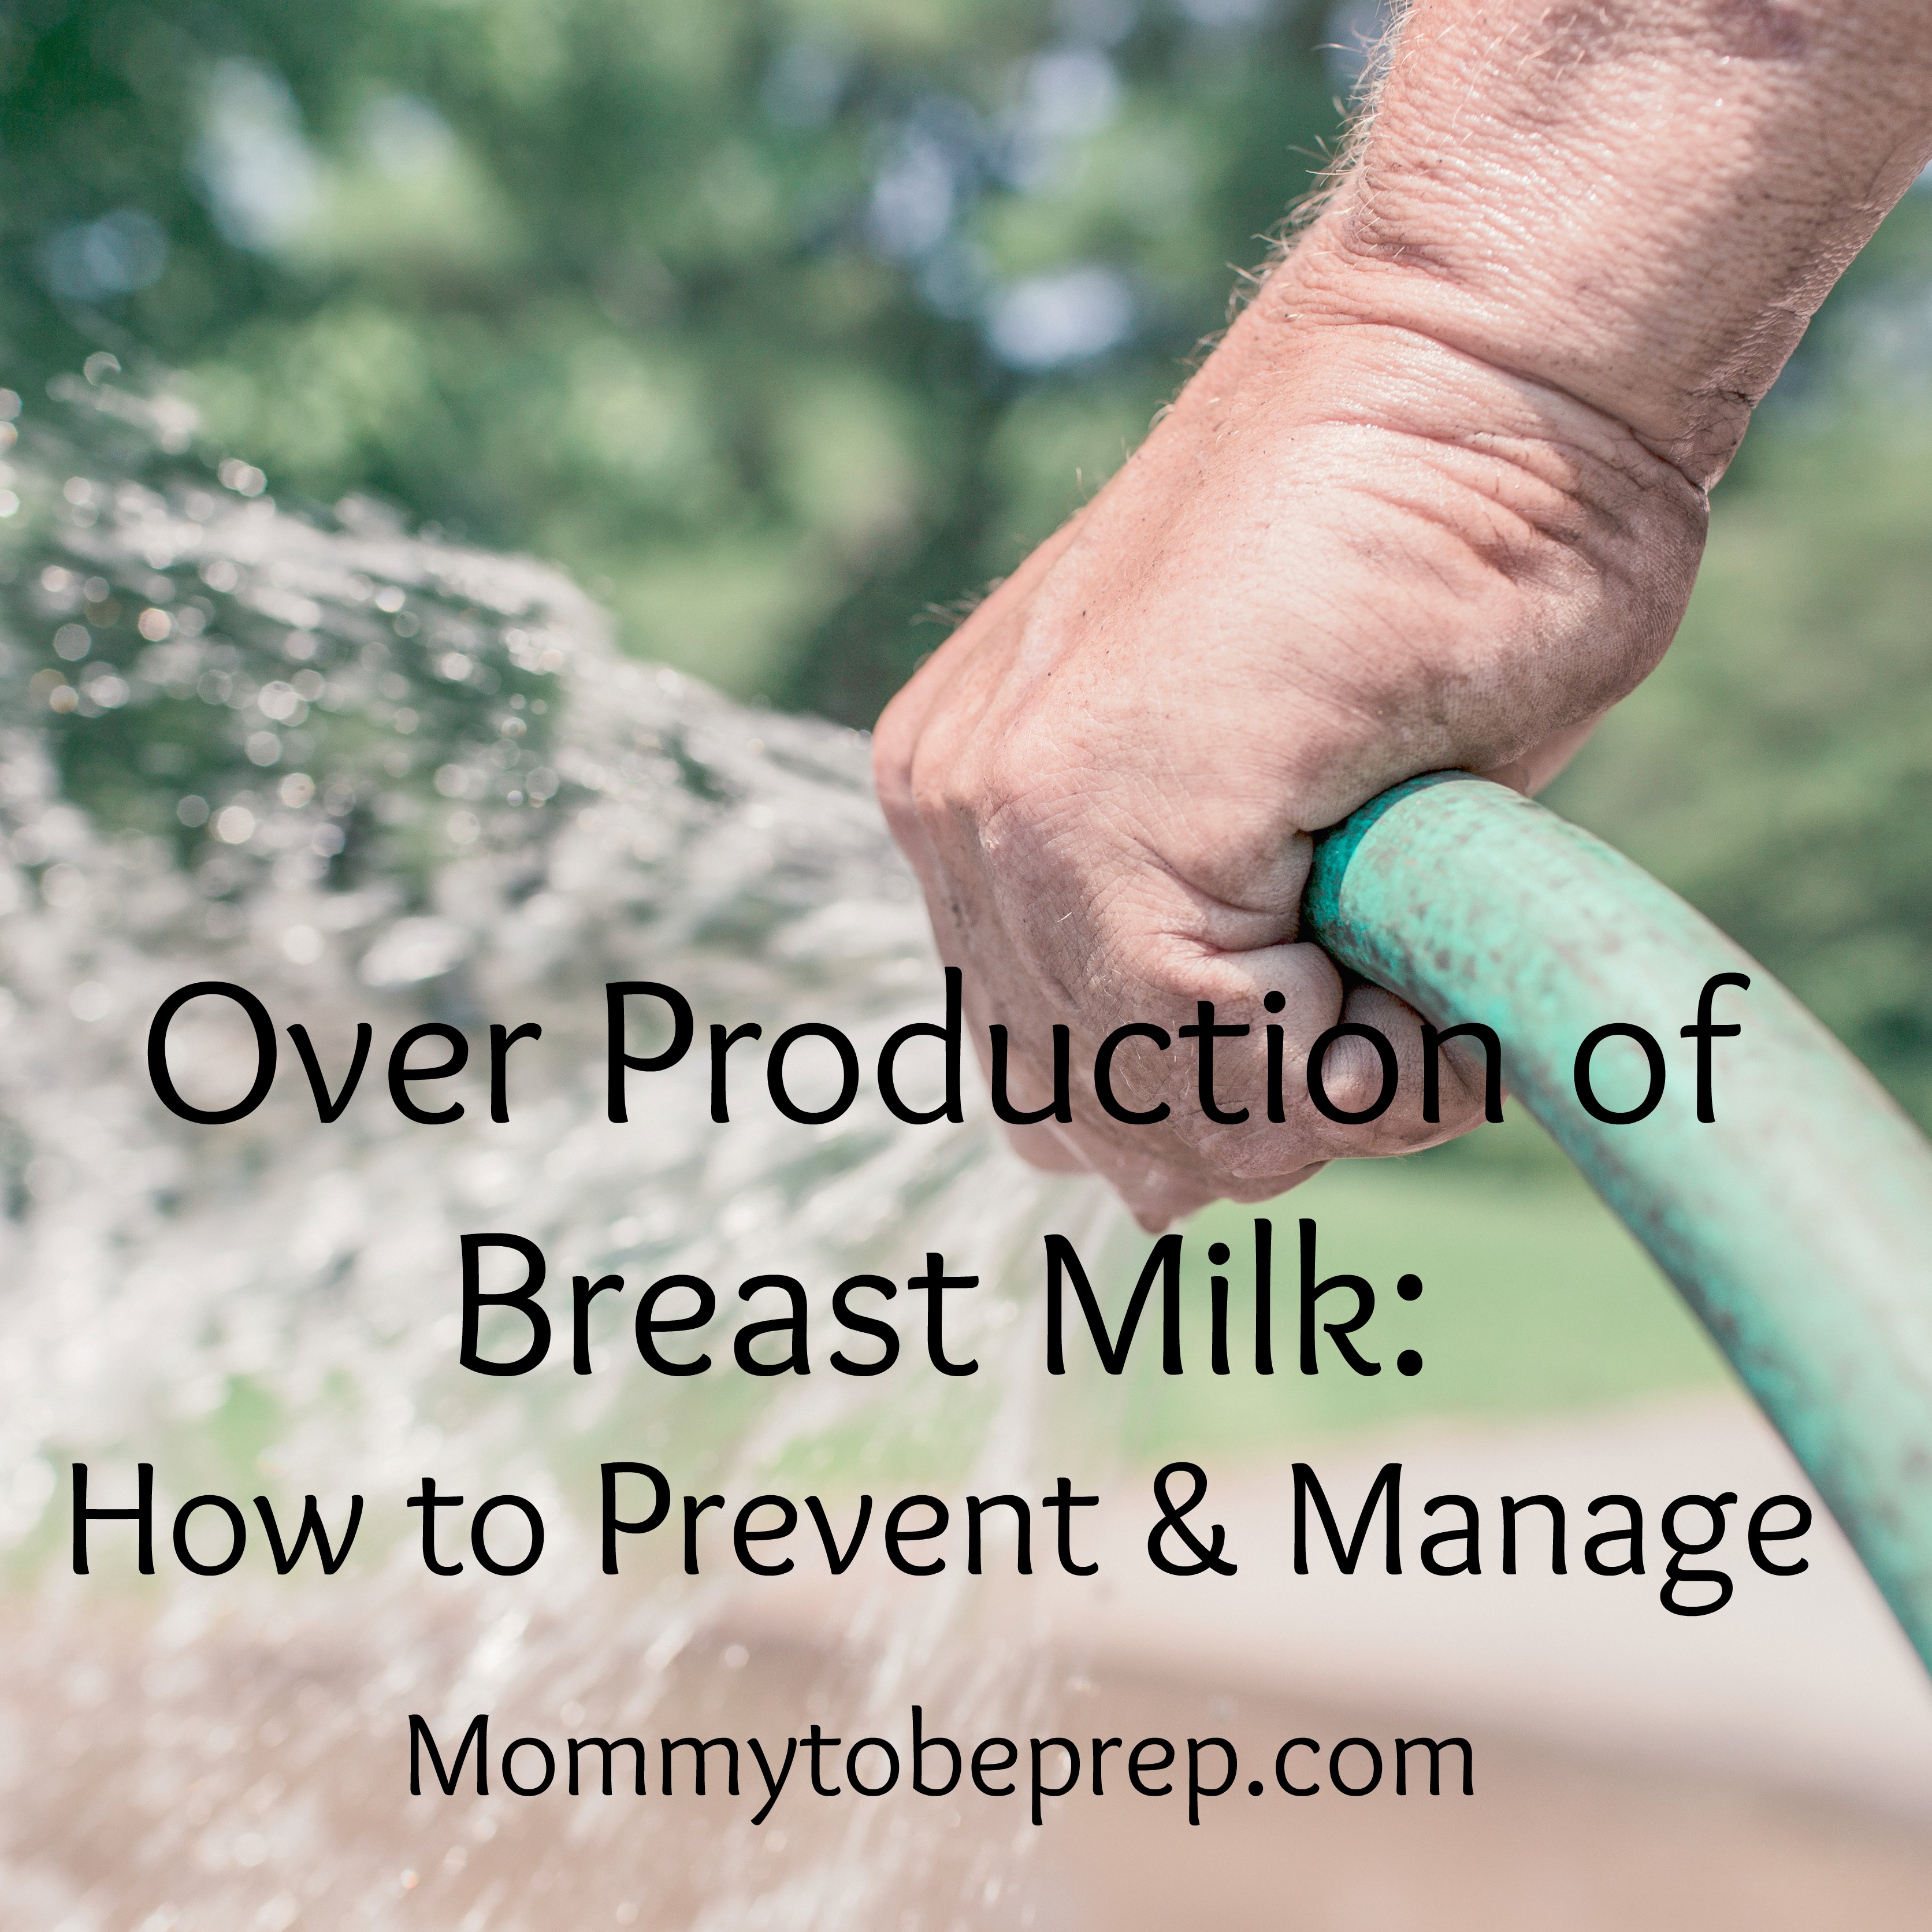 Over Production of Breast Milk: How To Prevent & Manage